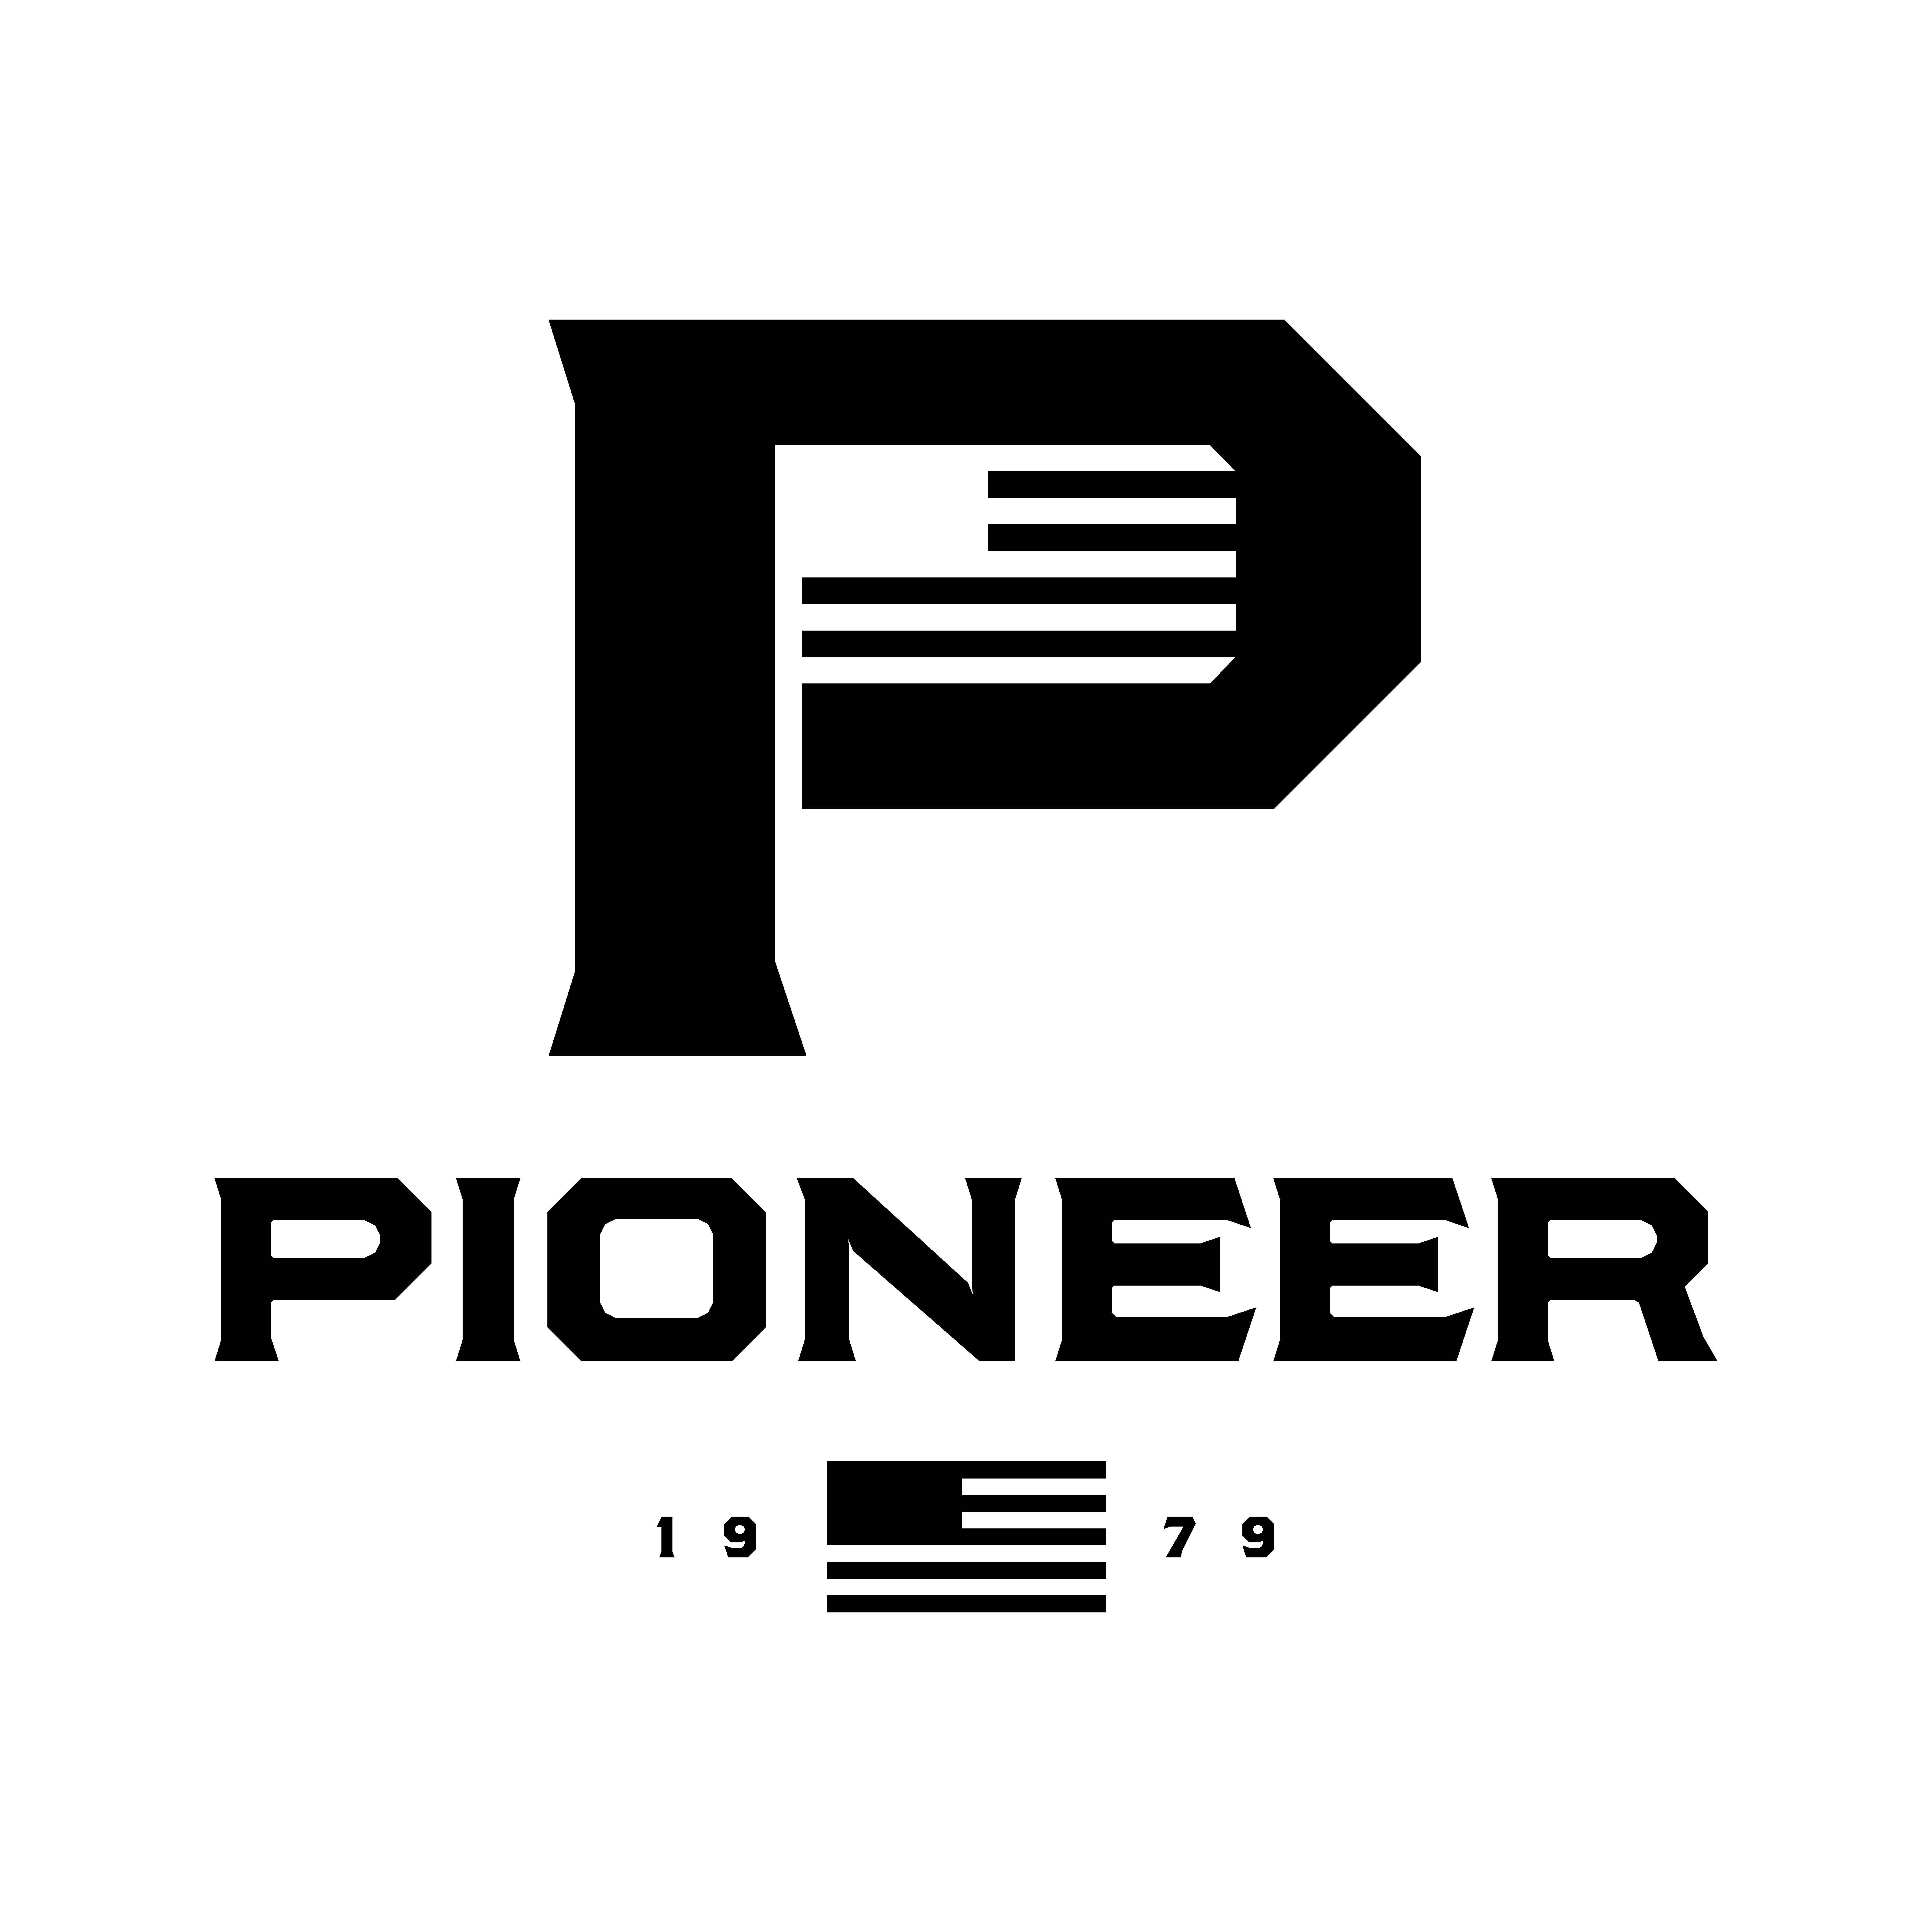 Pioneer Fit – Don’t buy OUR belt, buy YOUR belt